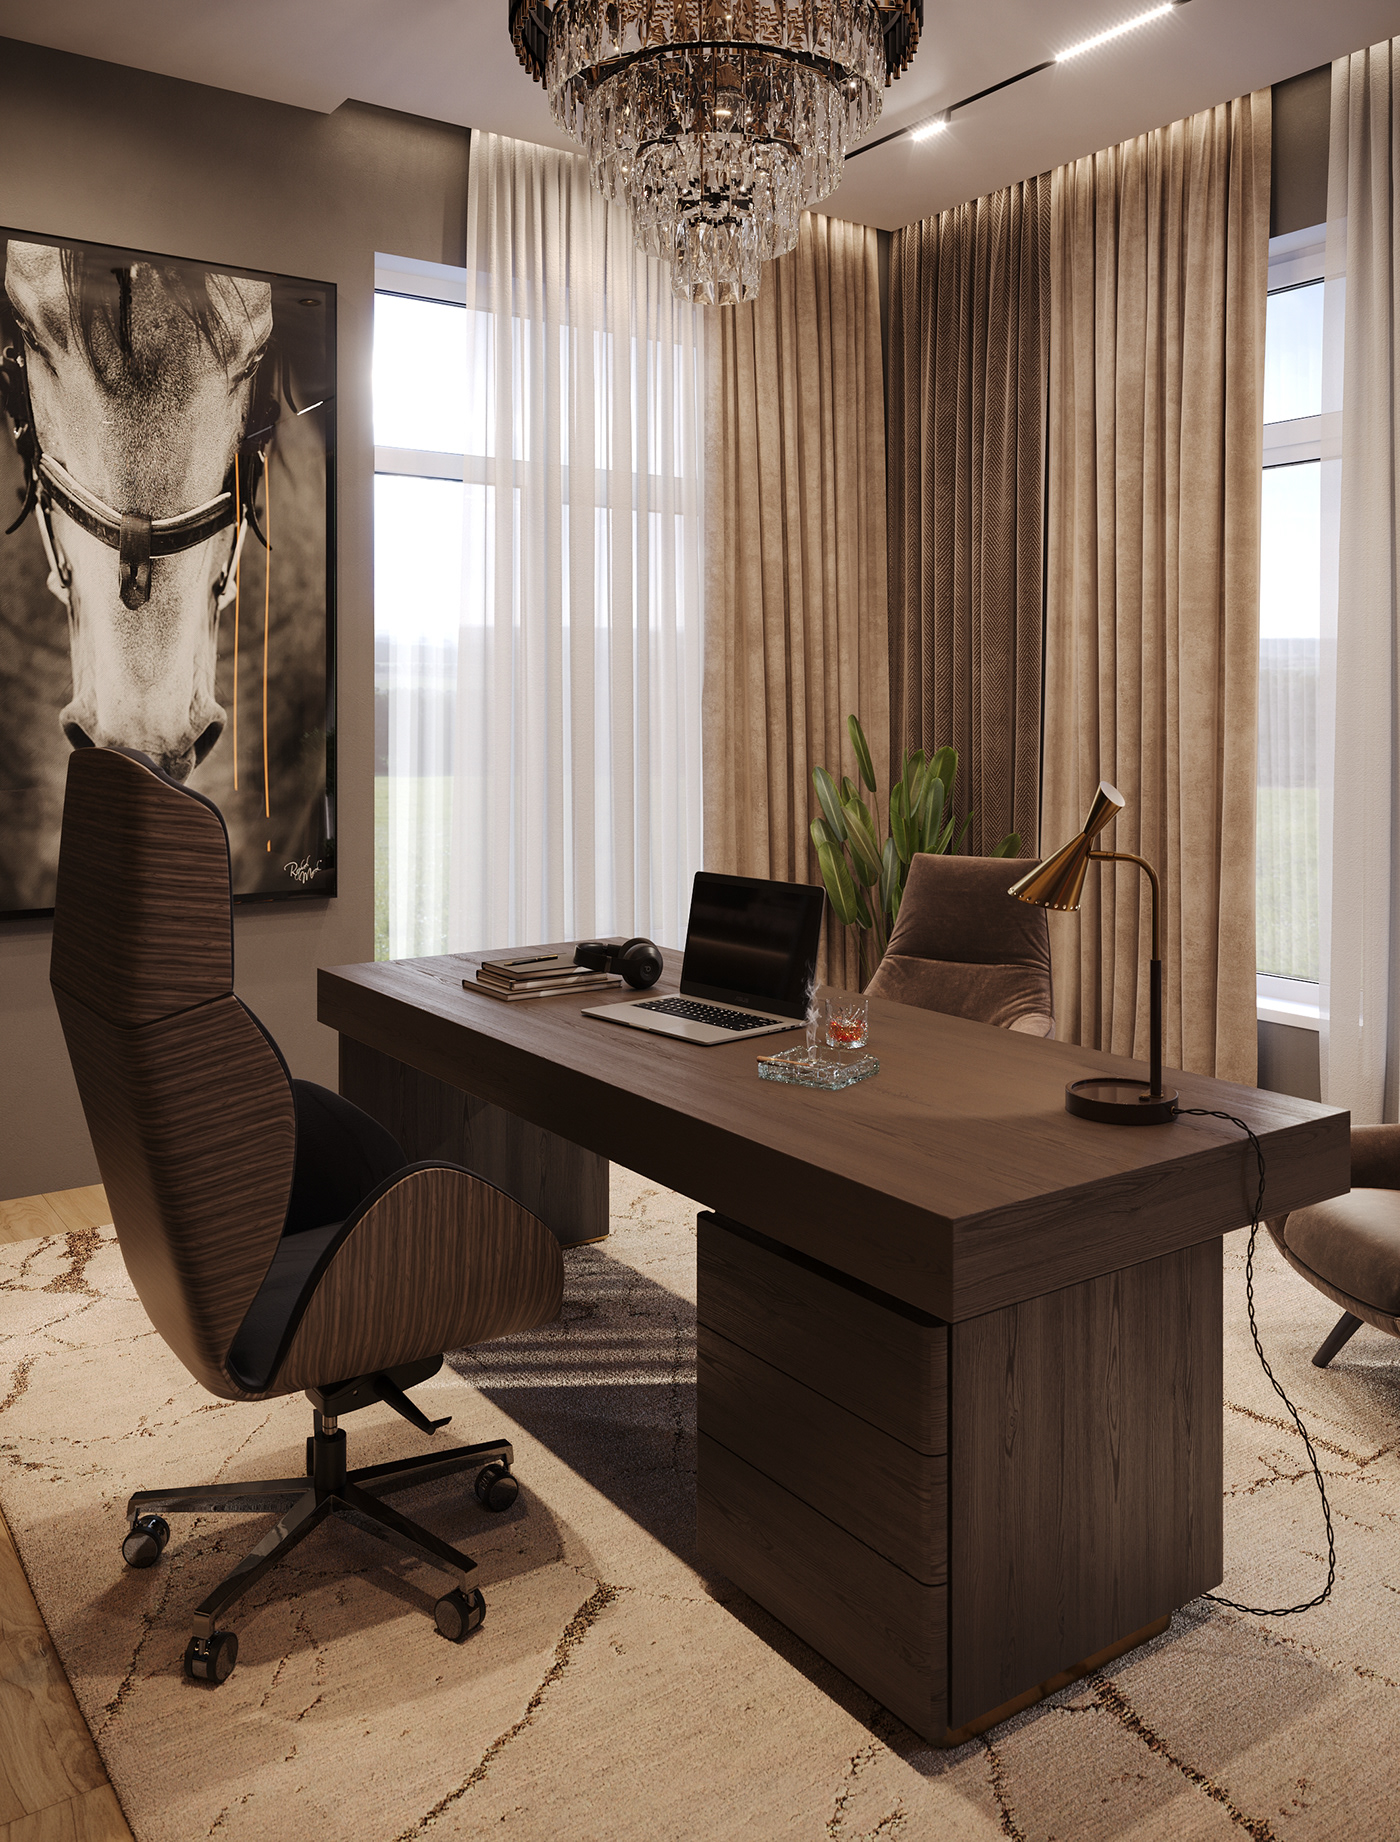 architecture interior design  visualization Render 3ds max 360 panorama modern classic home tour Office cabinet